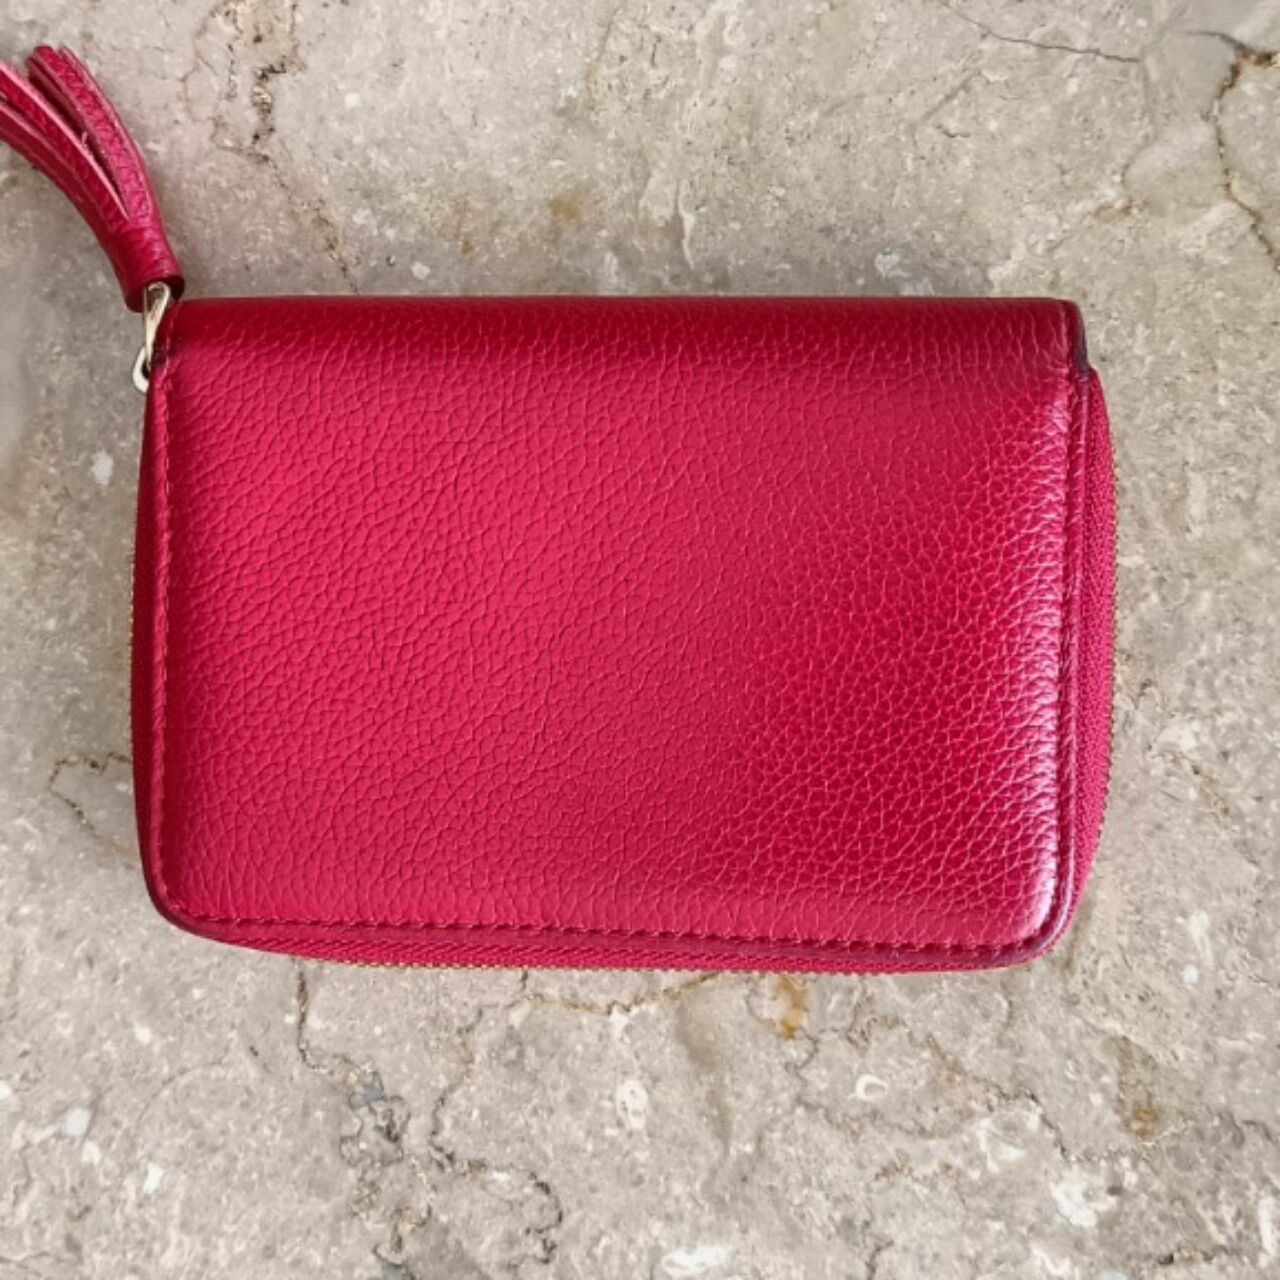 Coccinelle Red Dompet